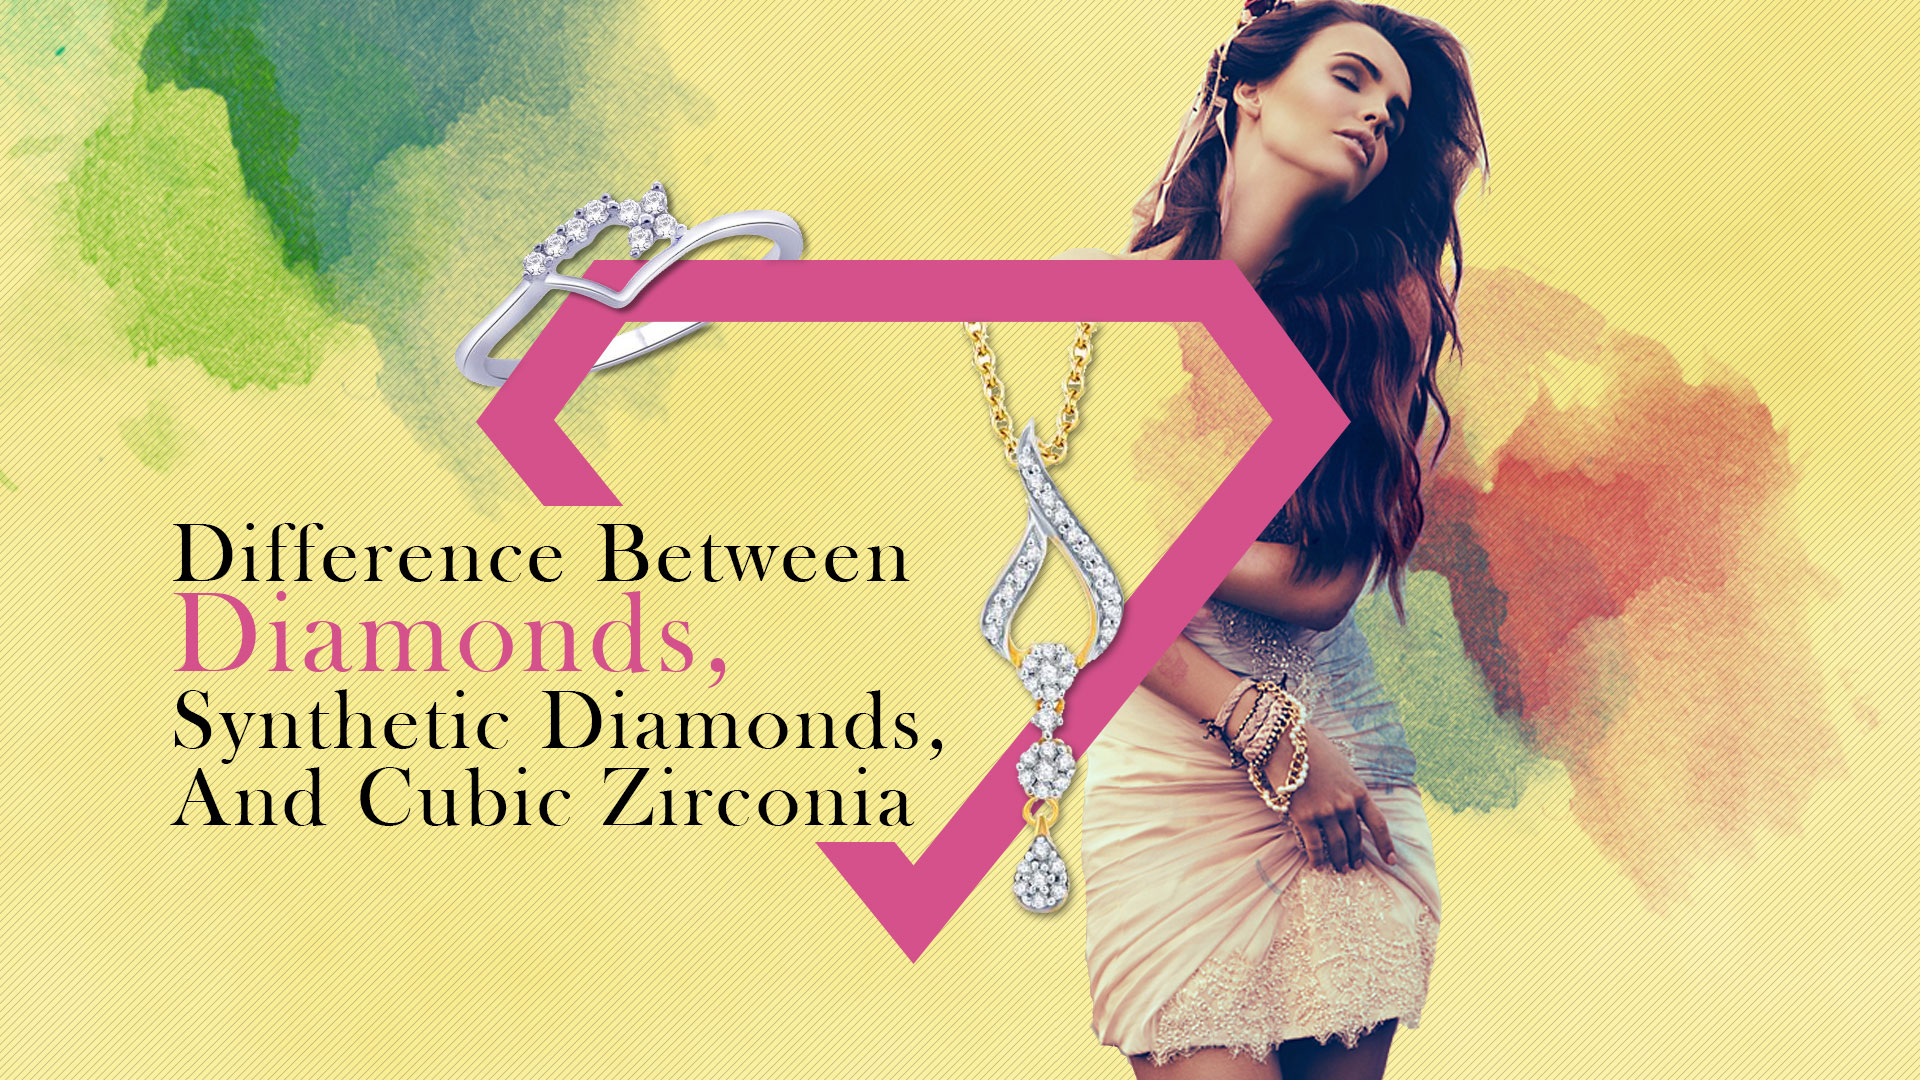 Difference between CZ n Diamonds